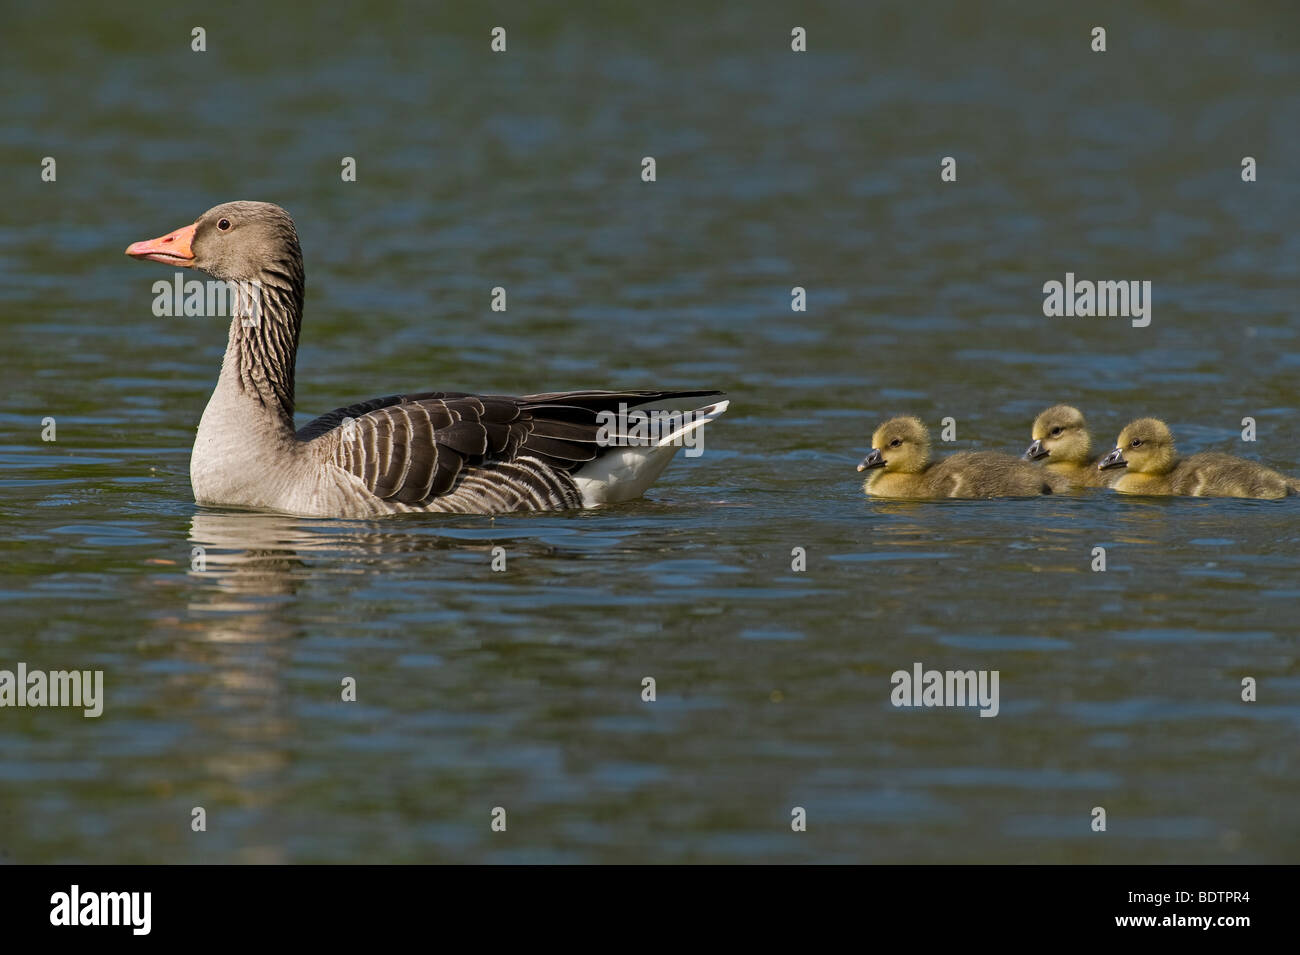 graylag geese chicks lake duemmer see germany Stock Photo